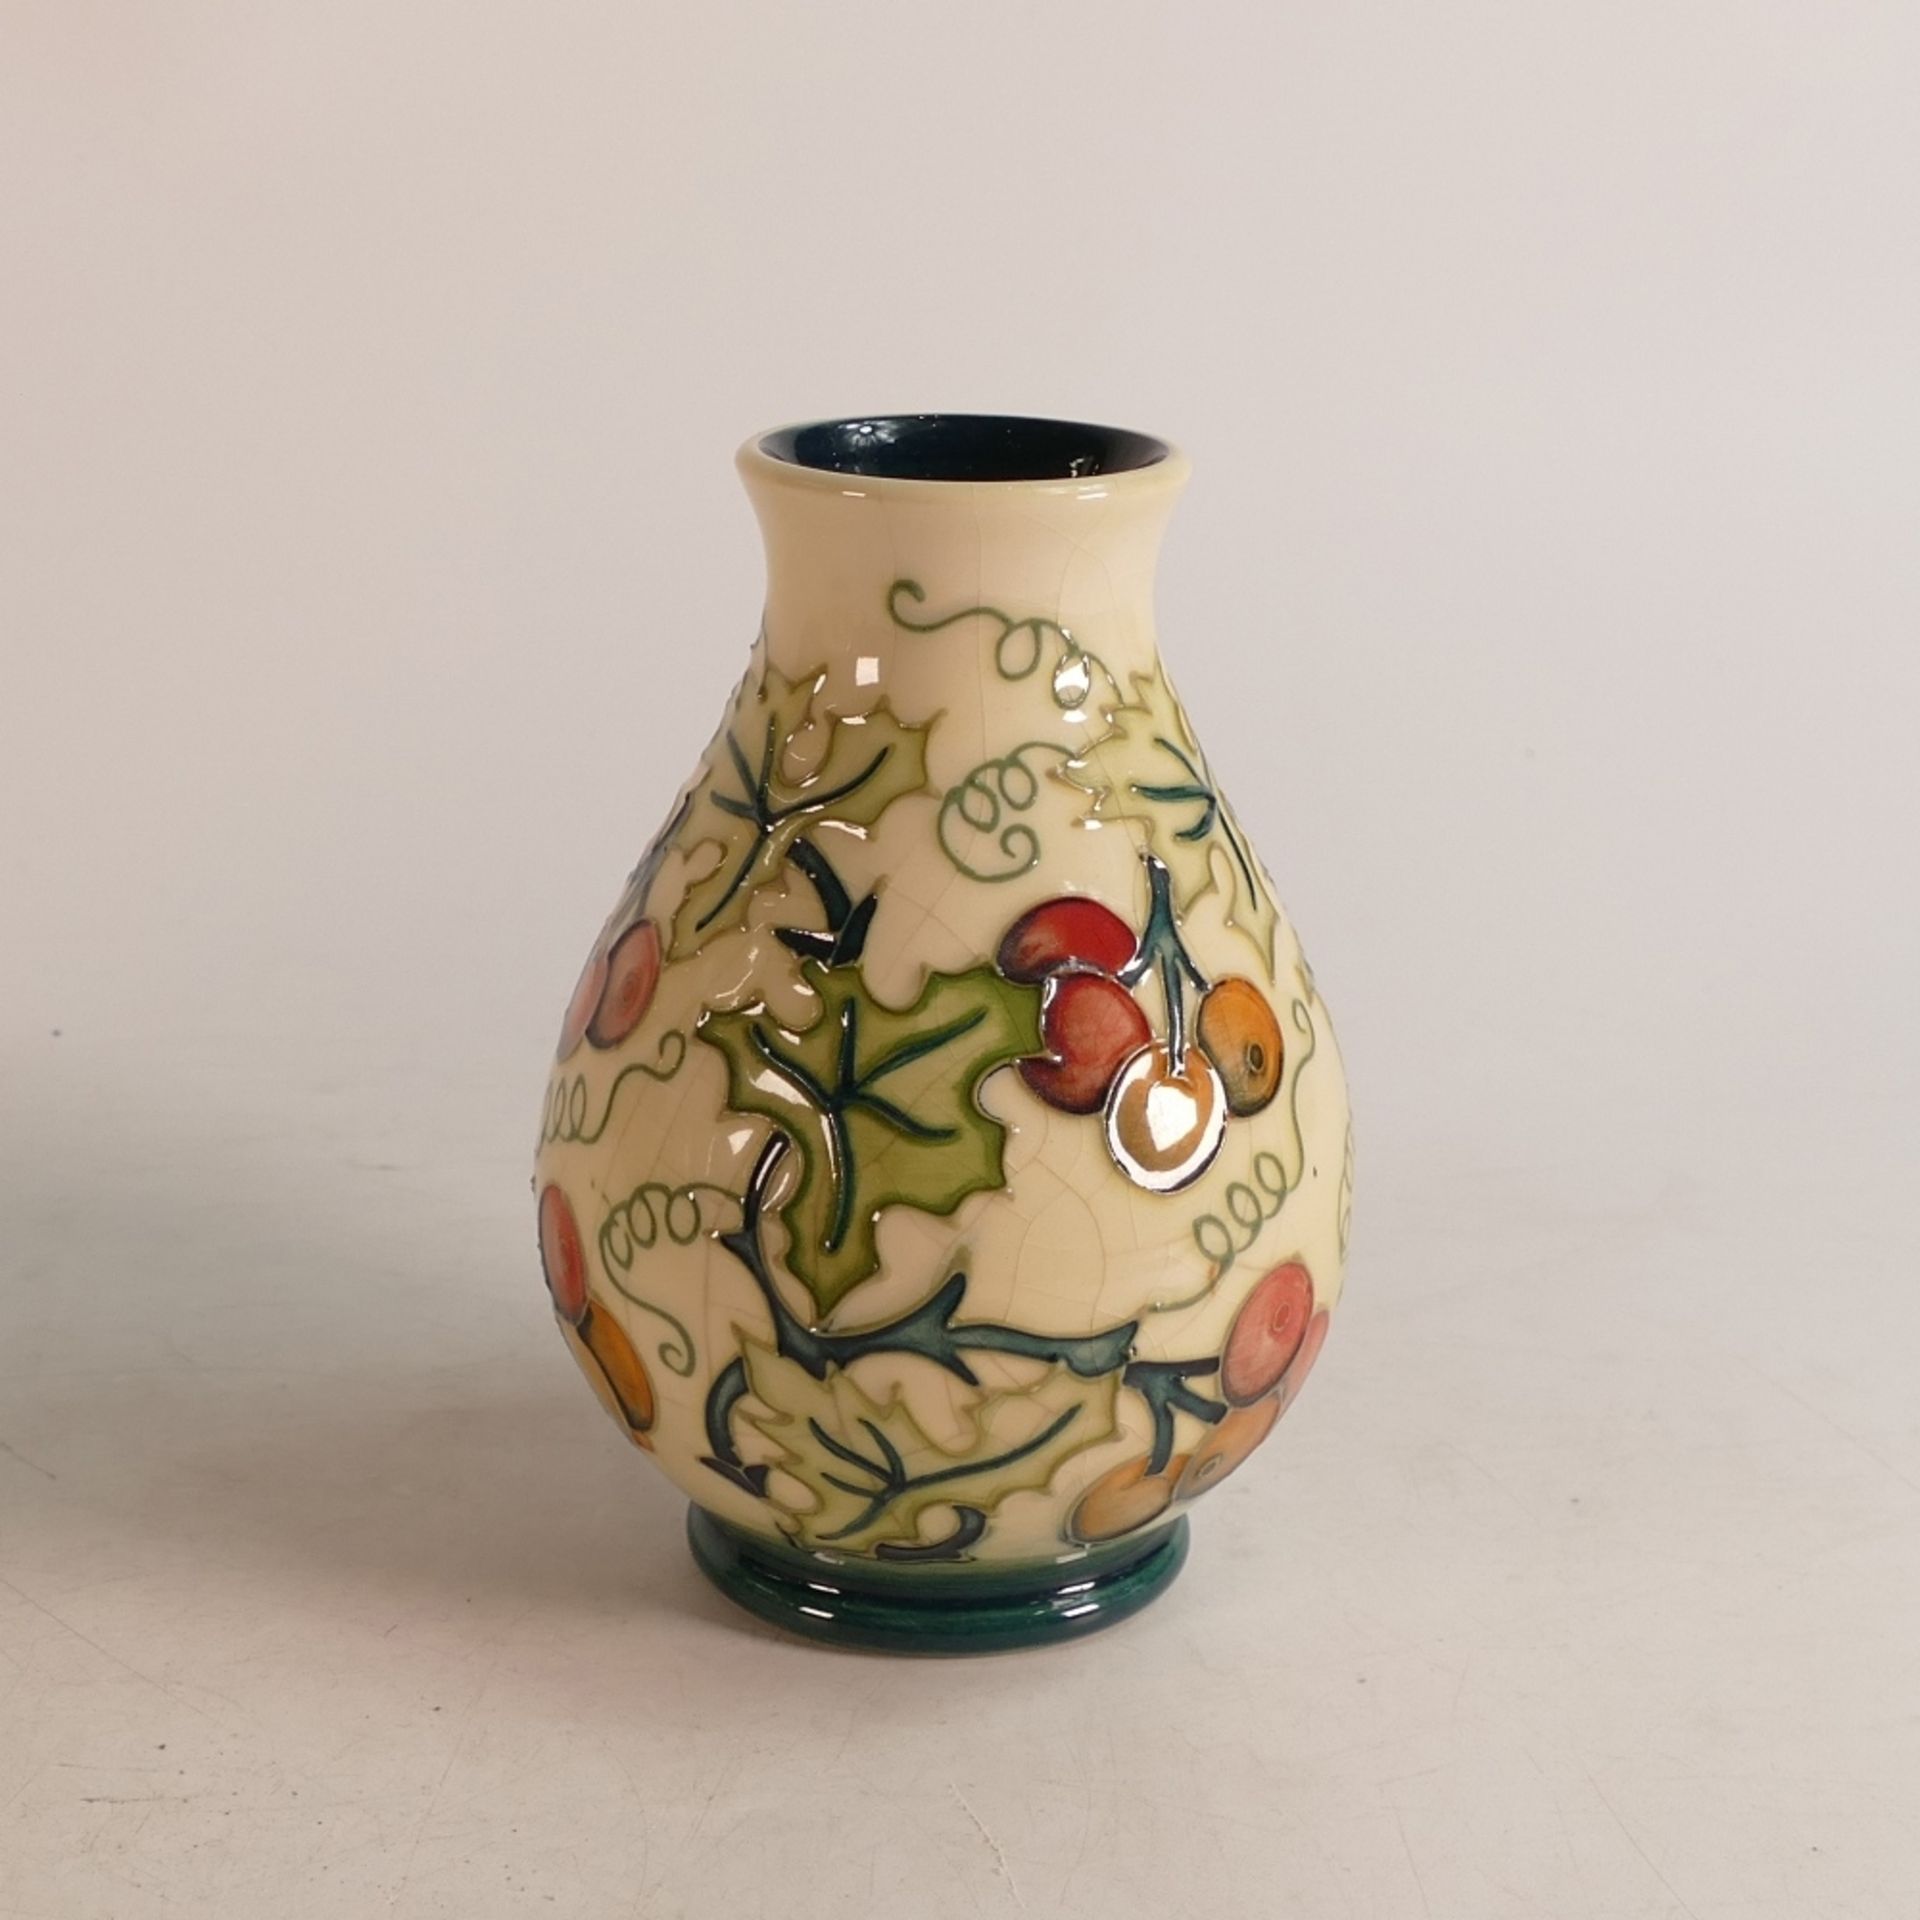 Moorcroft vase in the 'Holly Berries' pattern, signed by John Moorcroft and dated 1996, 14cm